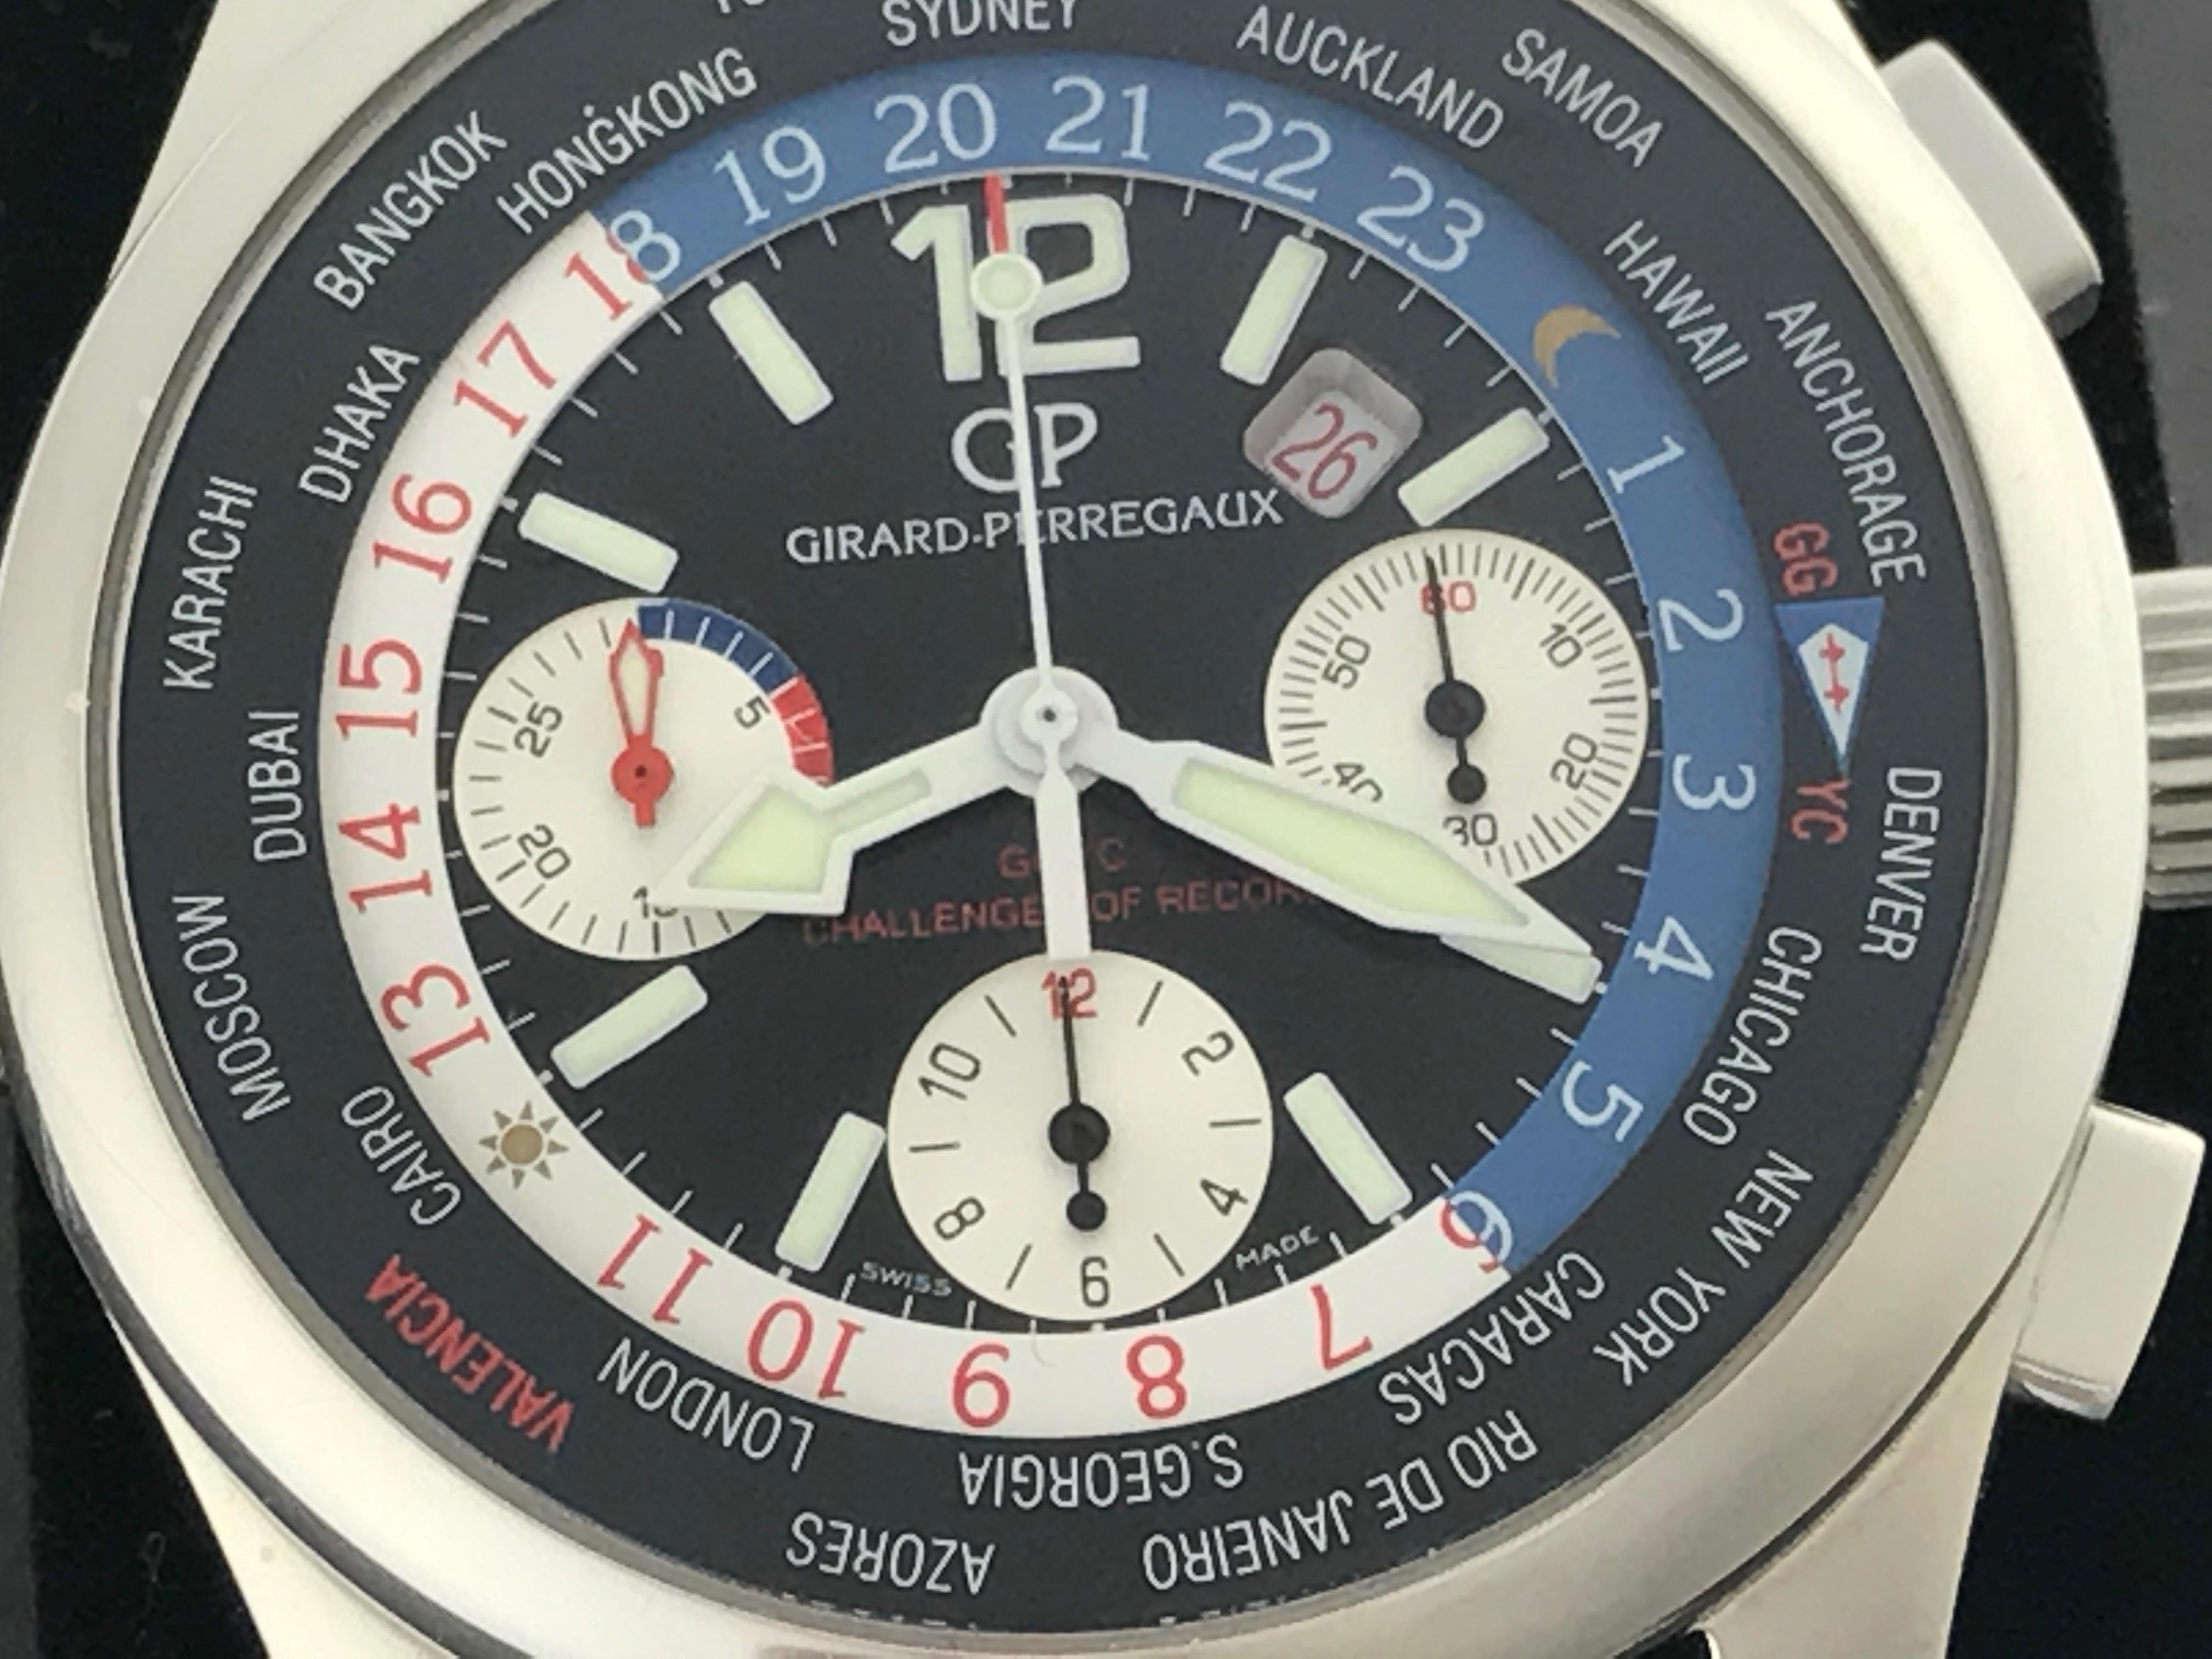 Girard Perregaux World Time Model 49800.11.657-F Pre Owned Mens Chronograph; Limited Series of 750 Pieces for BMW Oracle Challenger Record for 32nd America's Cup 2007.  Automatic Winding with Date. Black Dial with white markers with cities of the